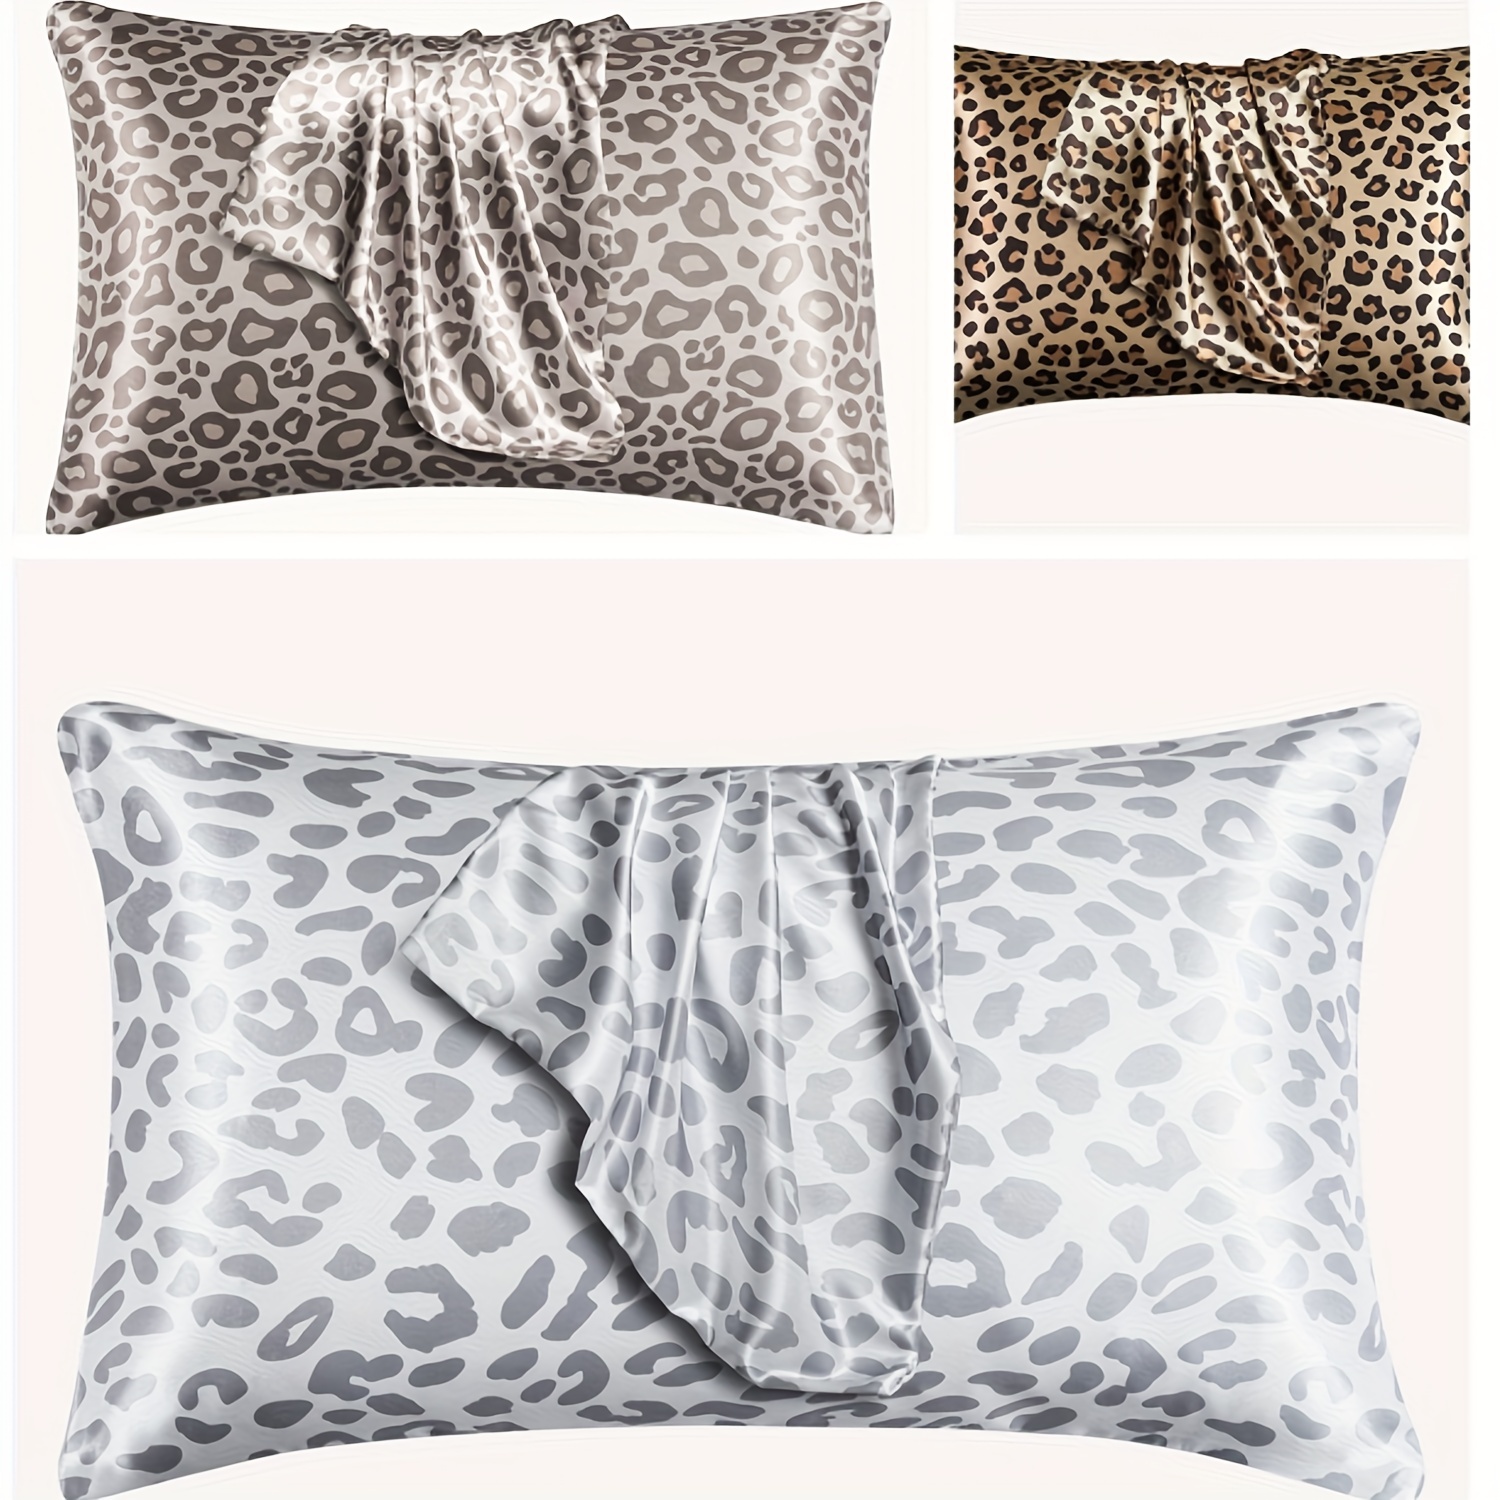 

2pcs Satin Pillowcase, Soft Leopard Print Pillow Cover For Sleeping, Pillow Case With Envelope Opening Design, Bedding